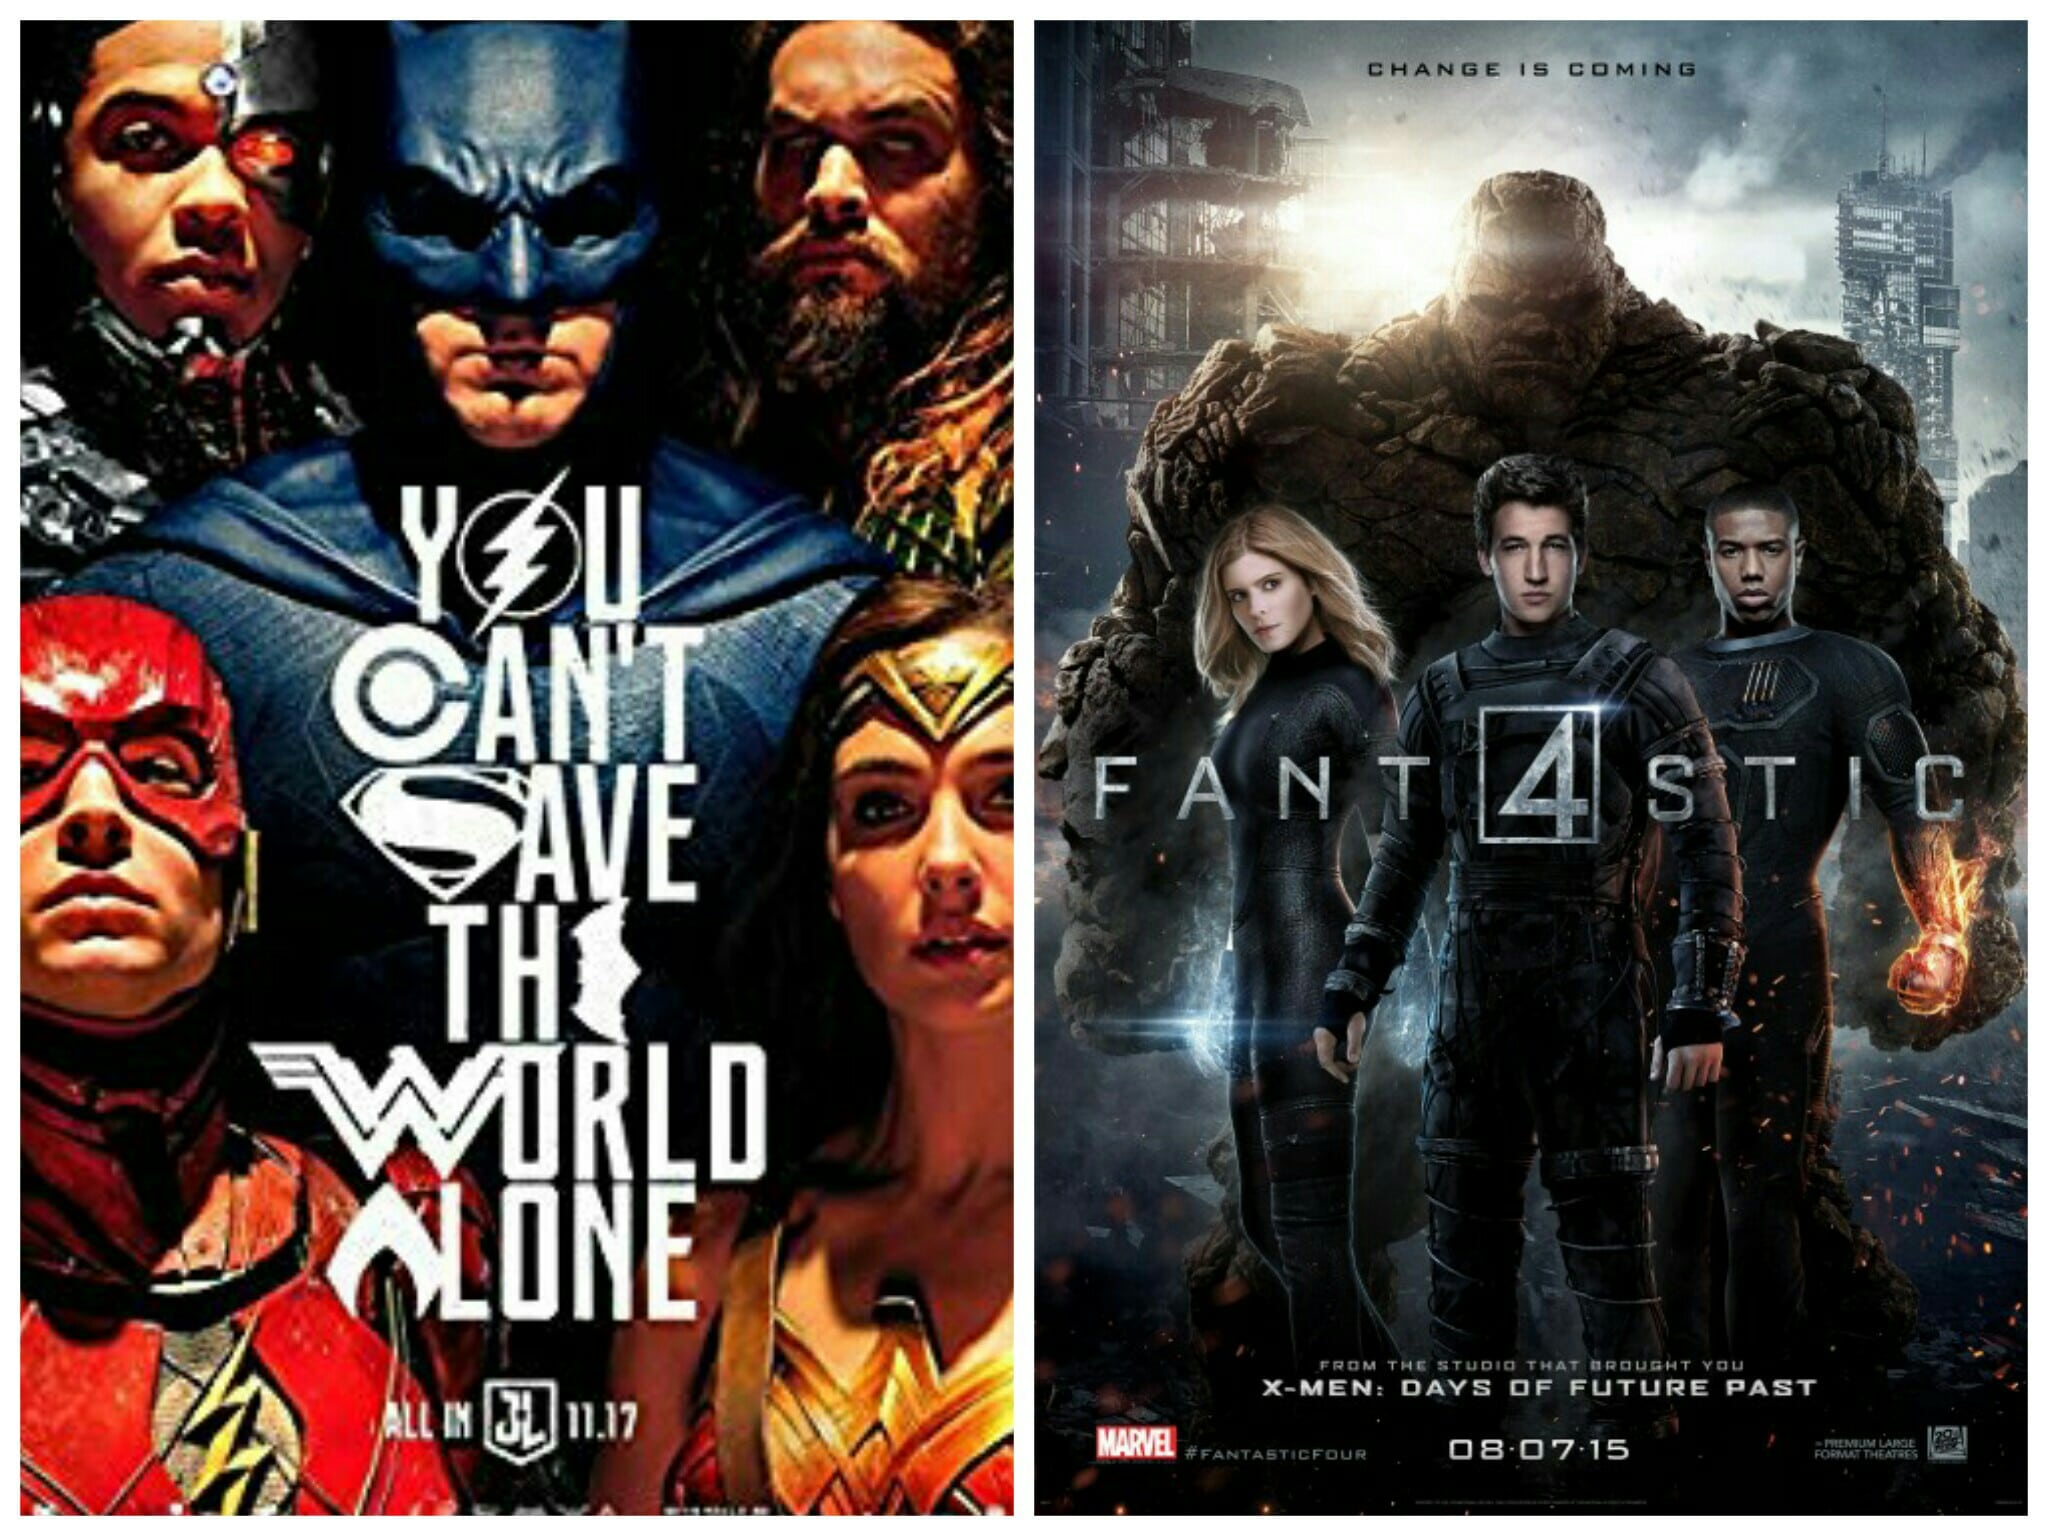 “Fantastic Four” Director Josh Trank Gets Behind The Idea Of A Trank And Snyder Cut